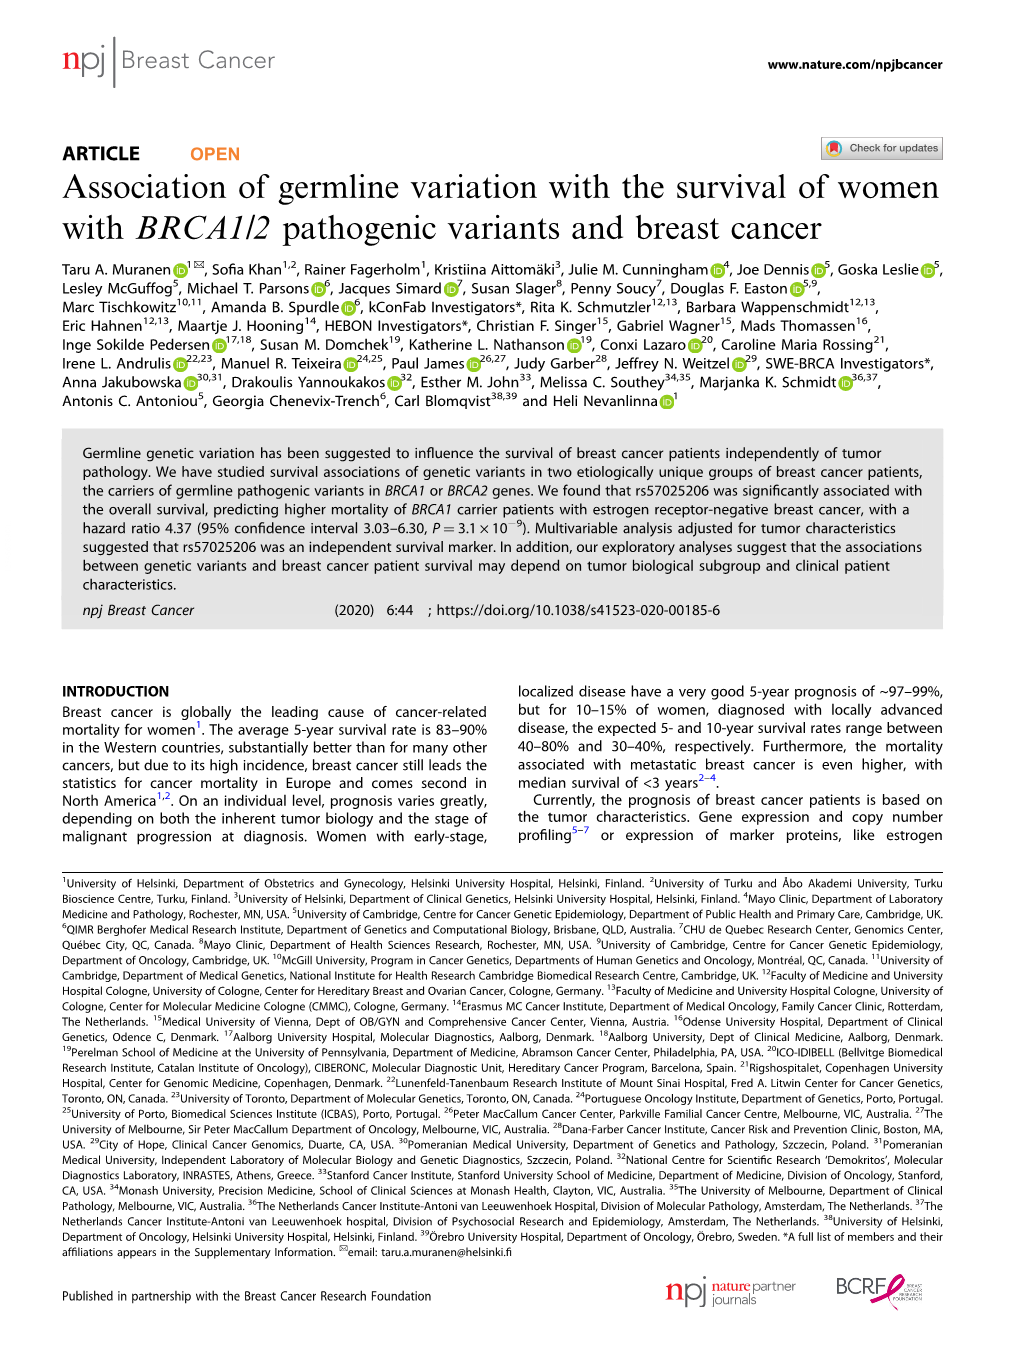 Association of Germline Variation with the Survival of Women with BRCA1/2 Pathogenic Variants and Breast Cancer ✉ Taru A